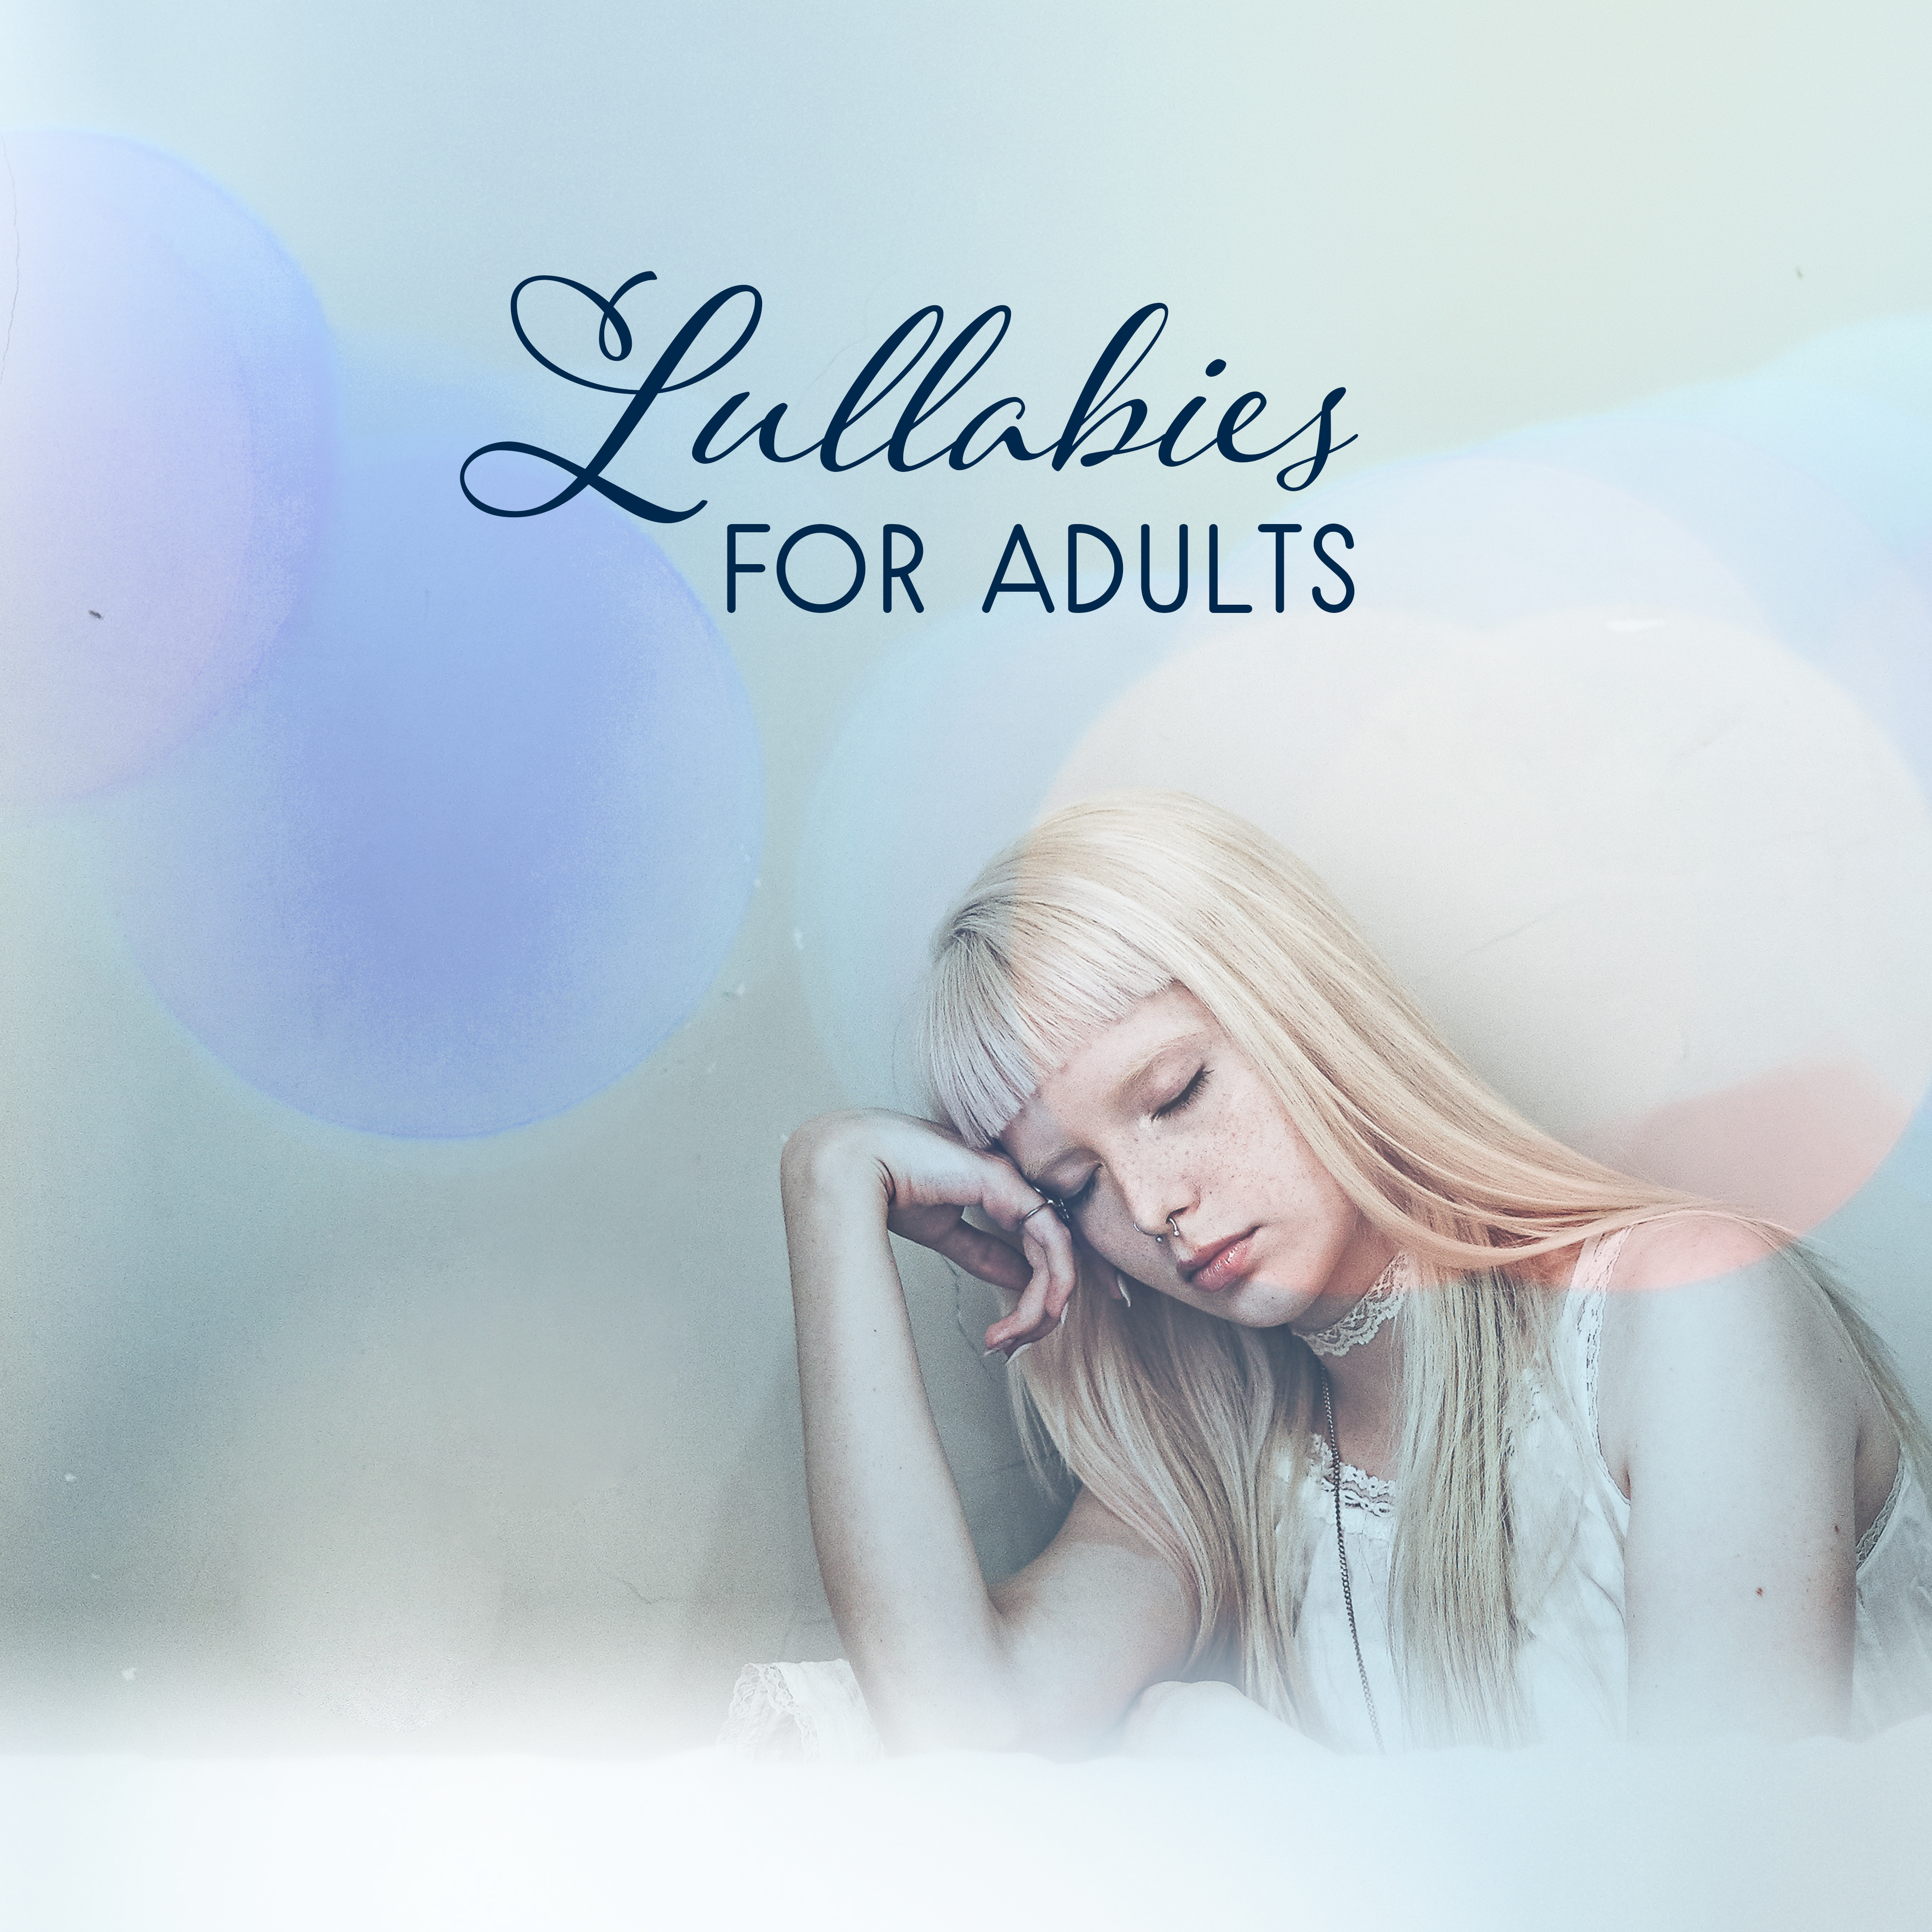 Lullabies for Adults  Chilled Time, Sleep Music, Pure Mind, New Age at Goodnight, Relax  Chill